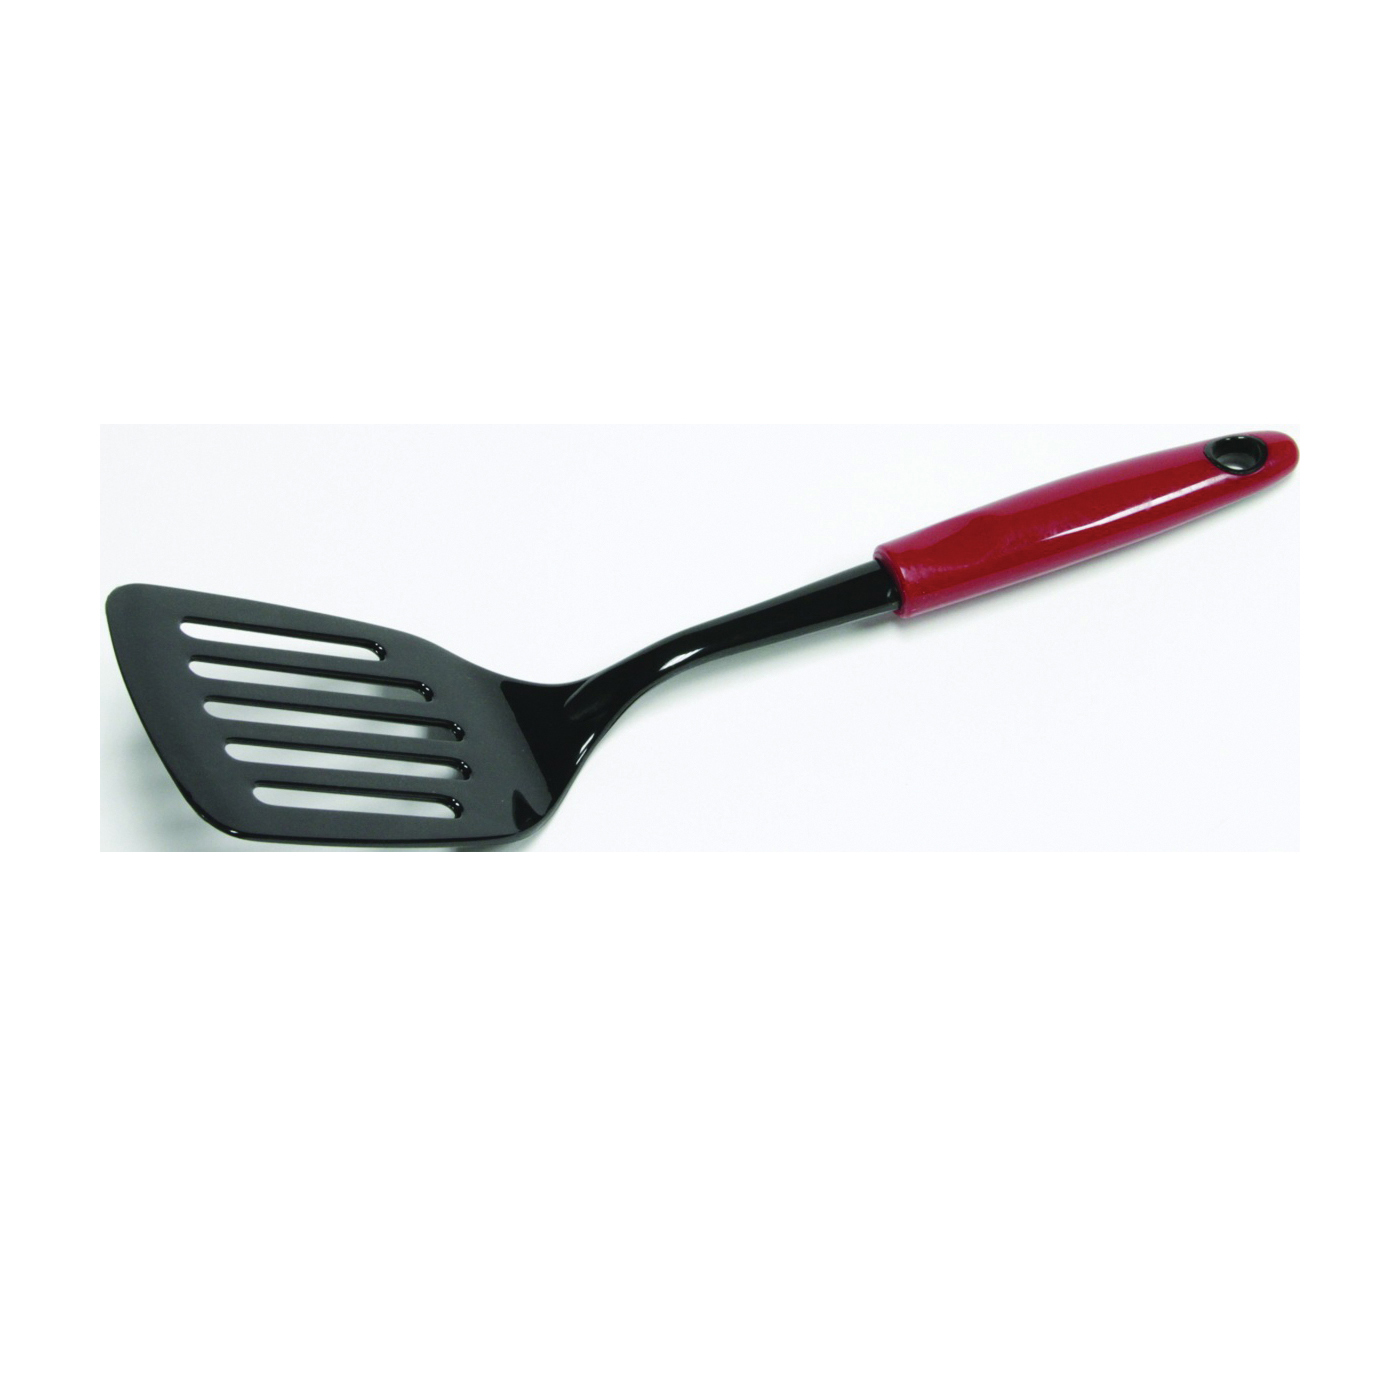 12111 Slotted Turner, Red